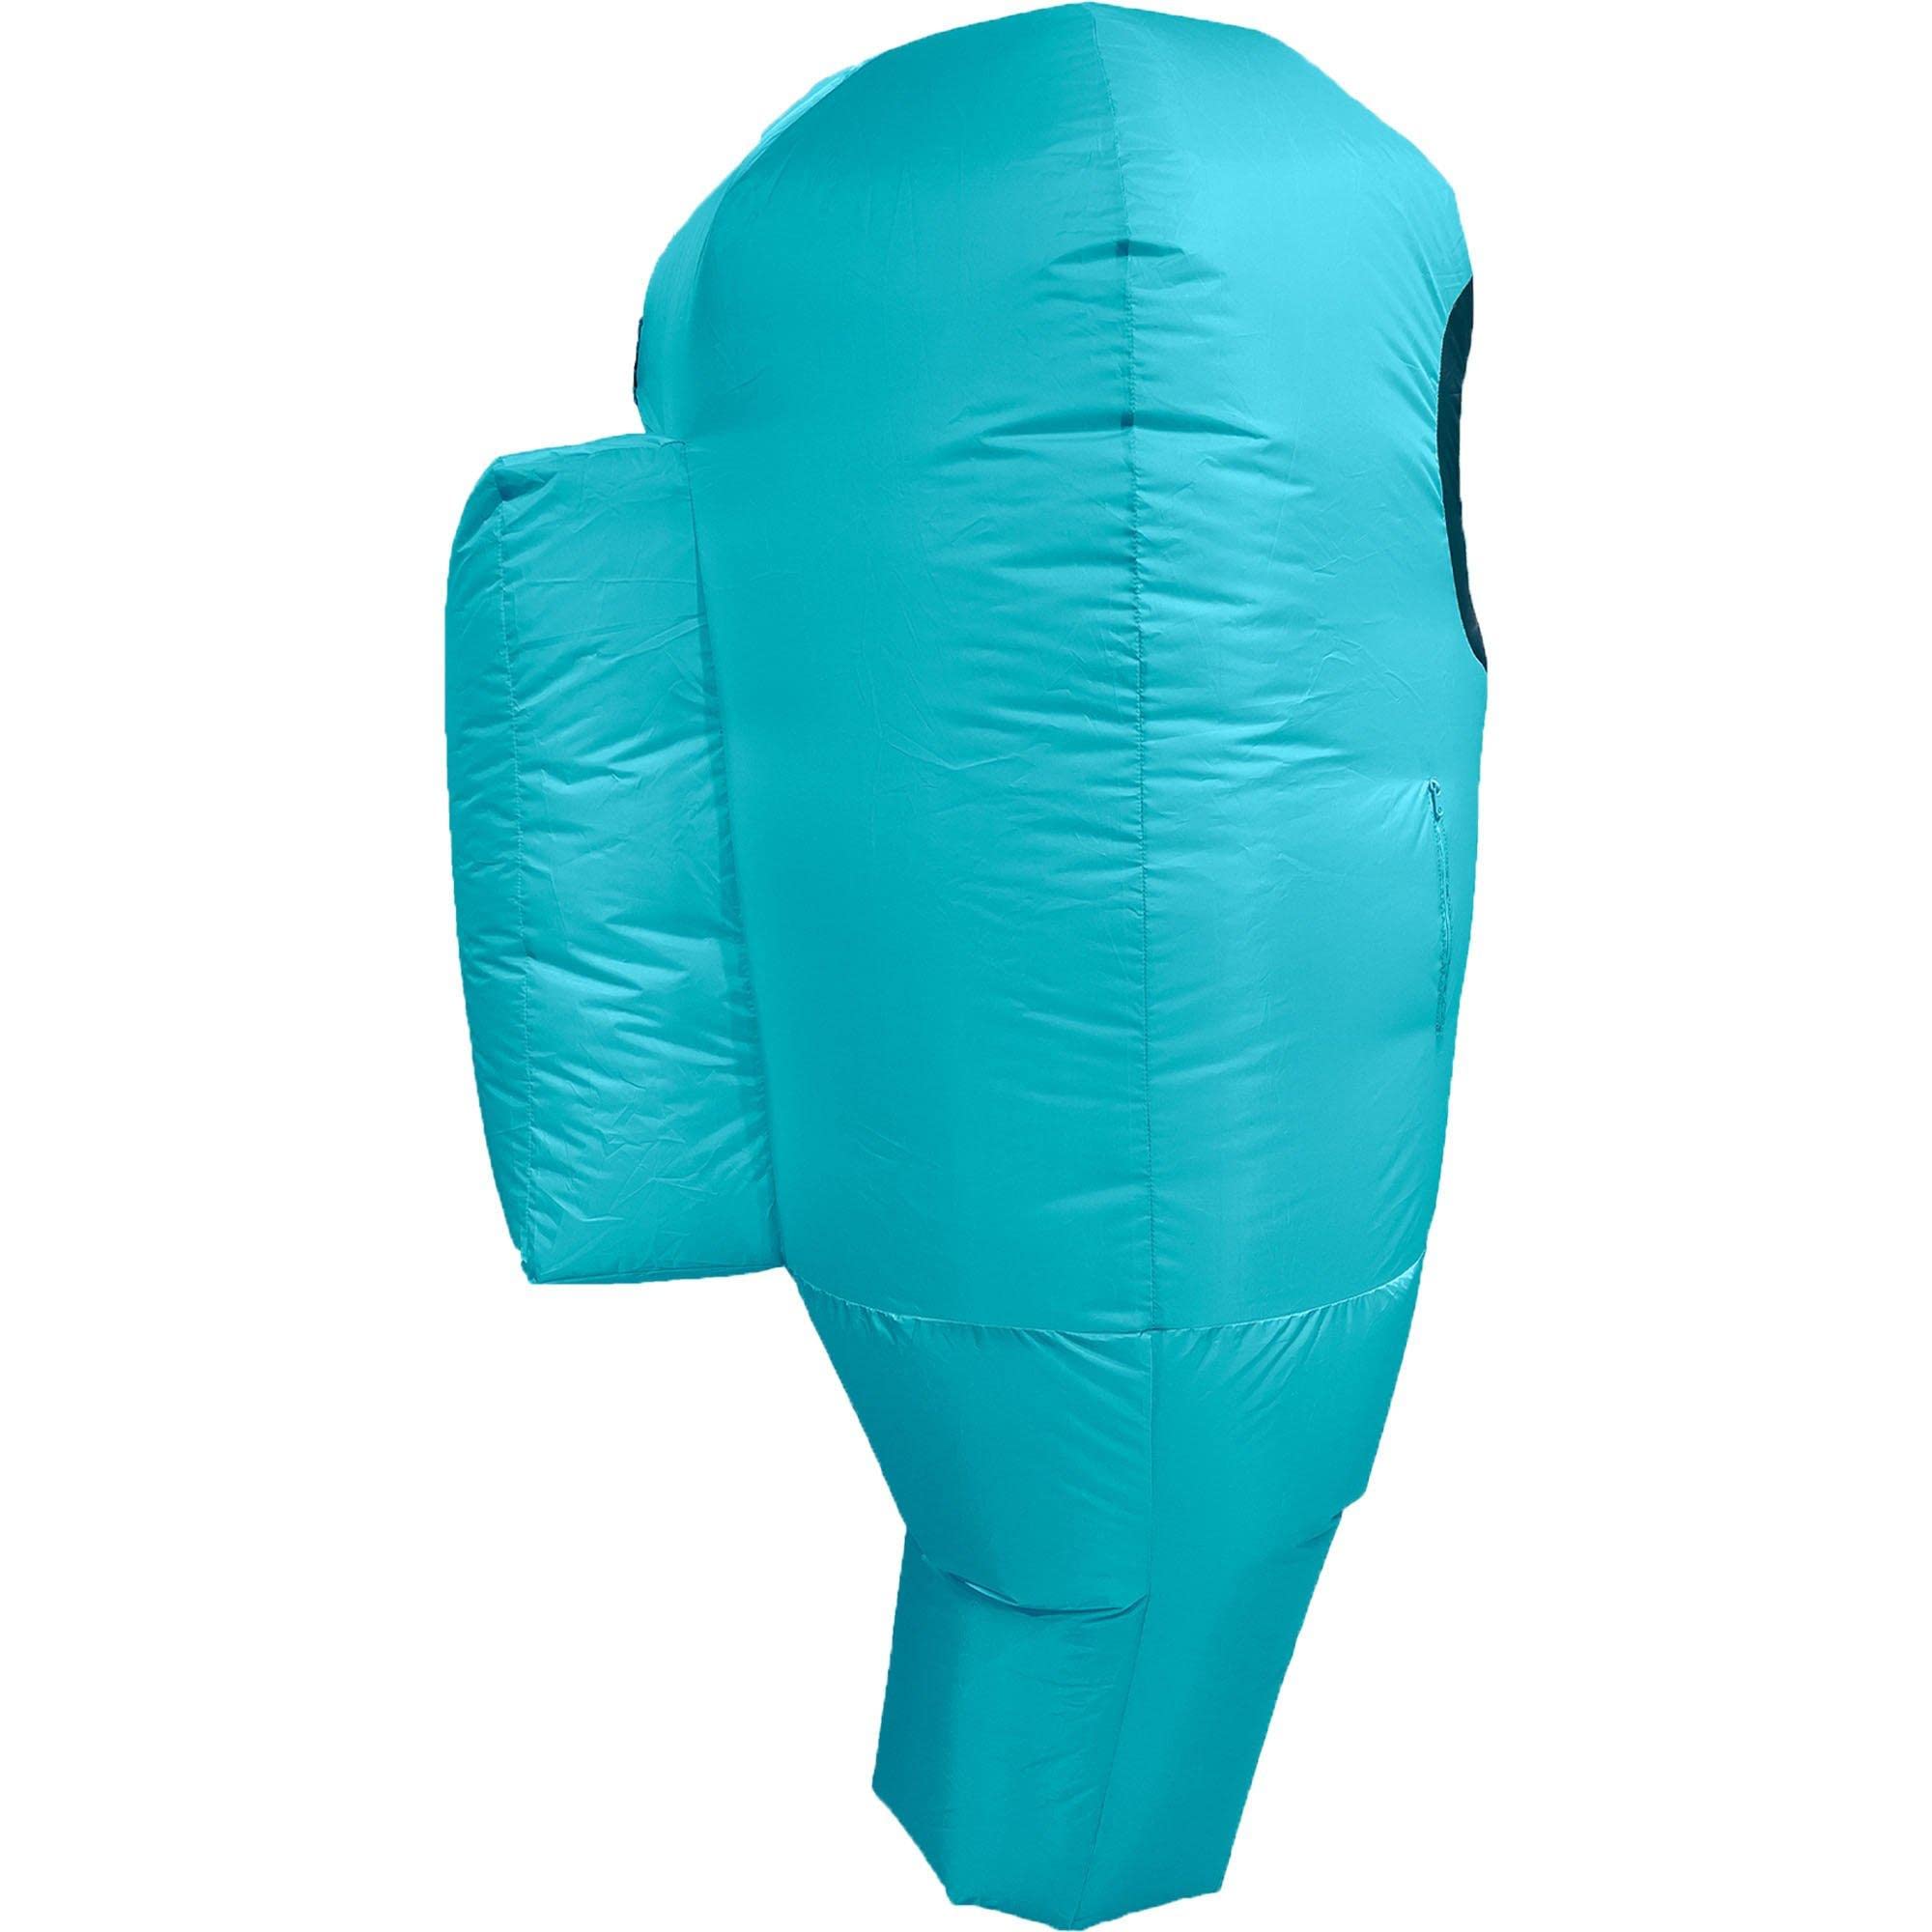 Party City Kids' Cyan Impostor Inflatable Costume for Children, Standard Size up to 4'9